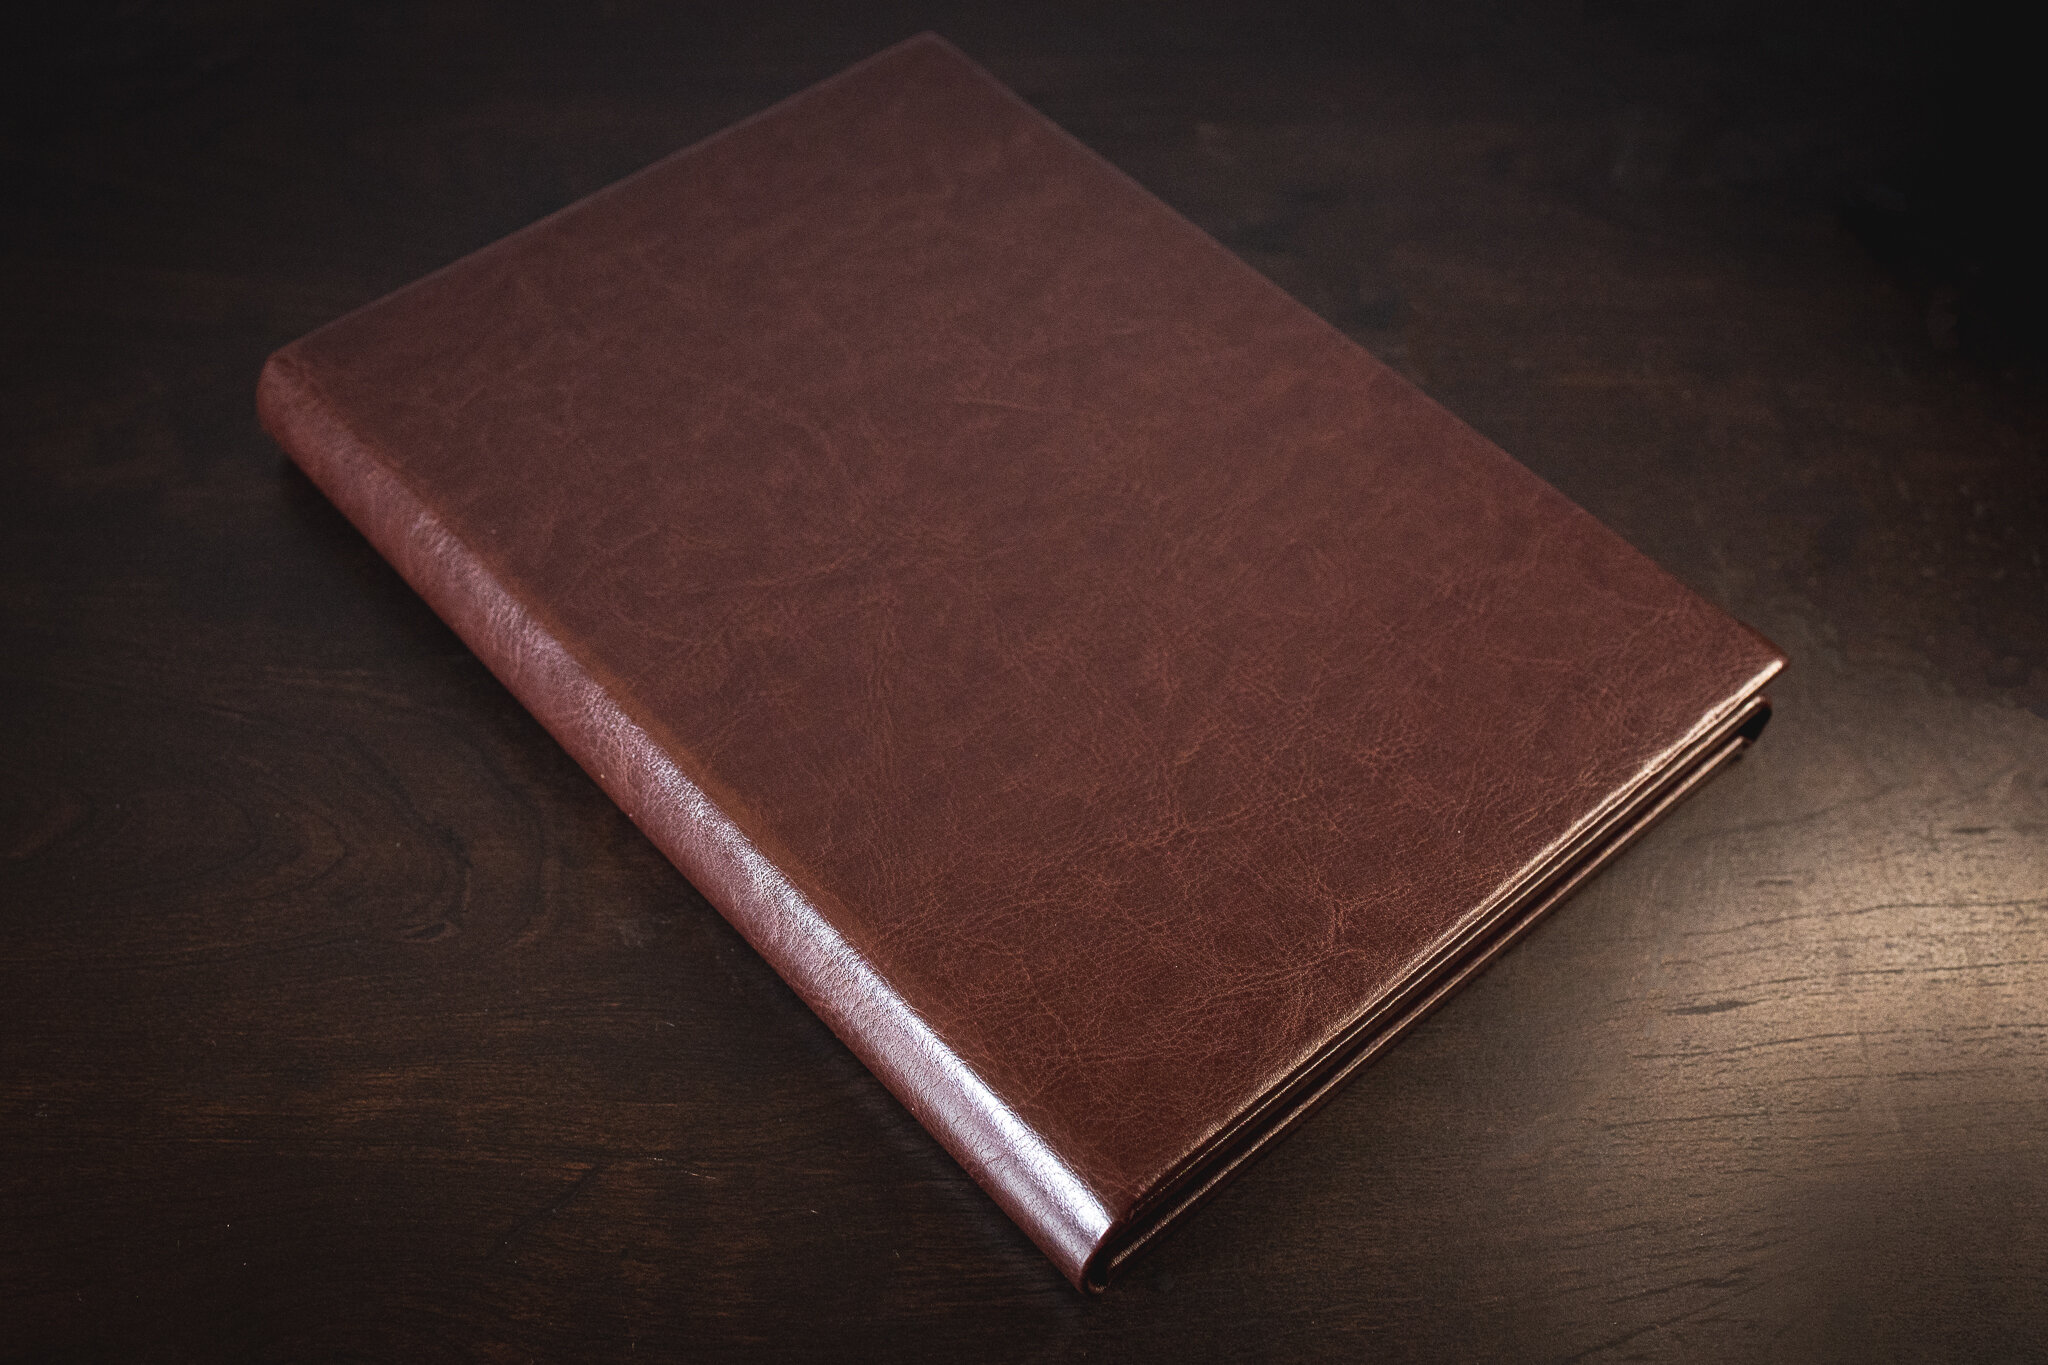 Leather Slim A5 Notebook / Planner Cover - Crazy Brown